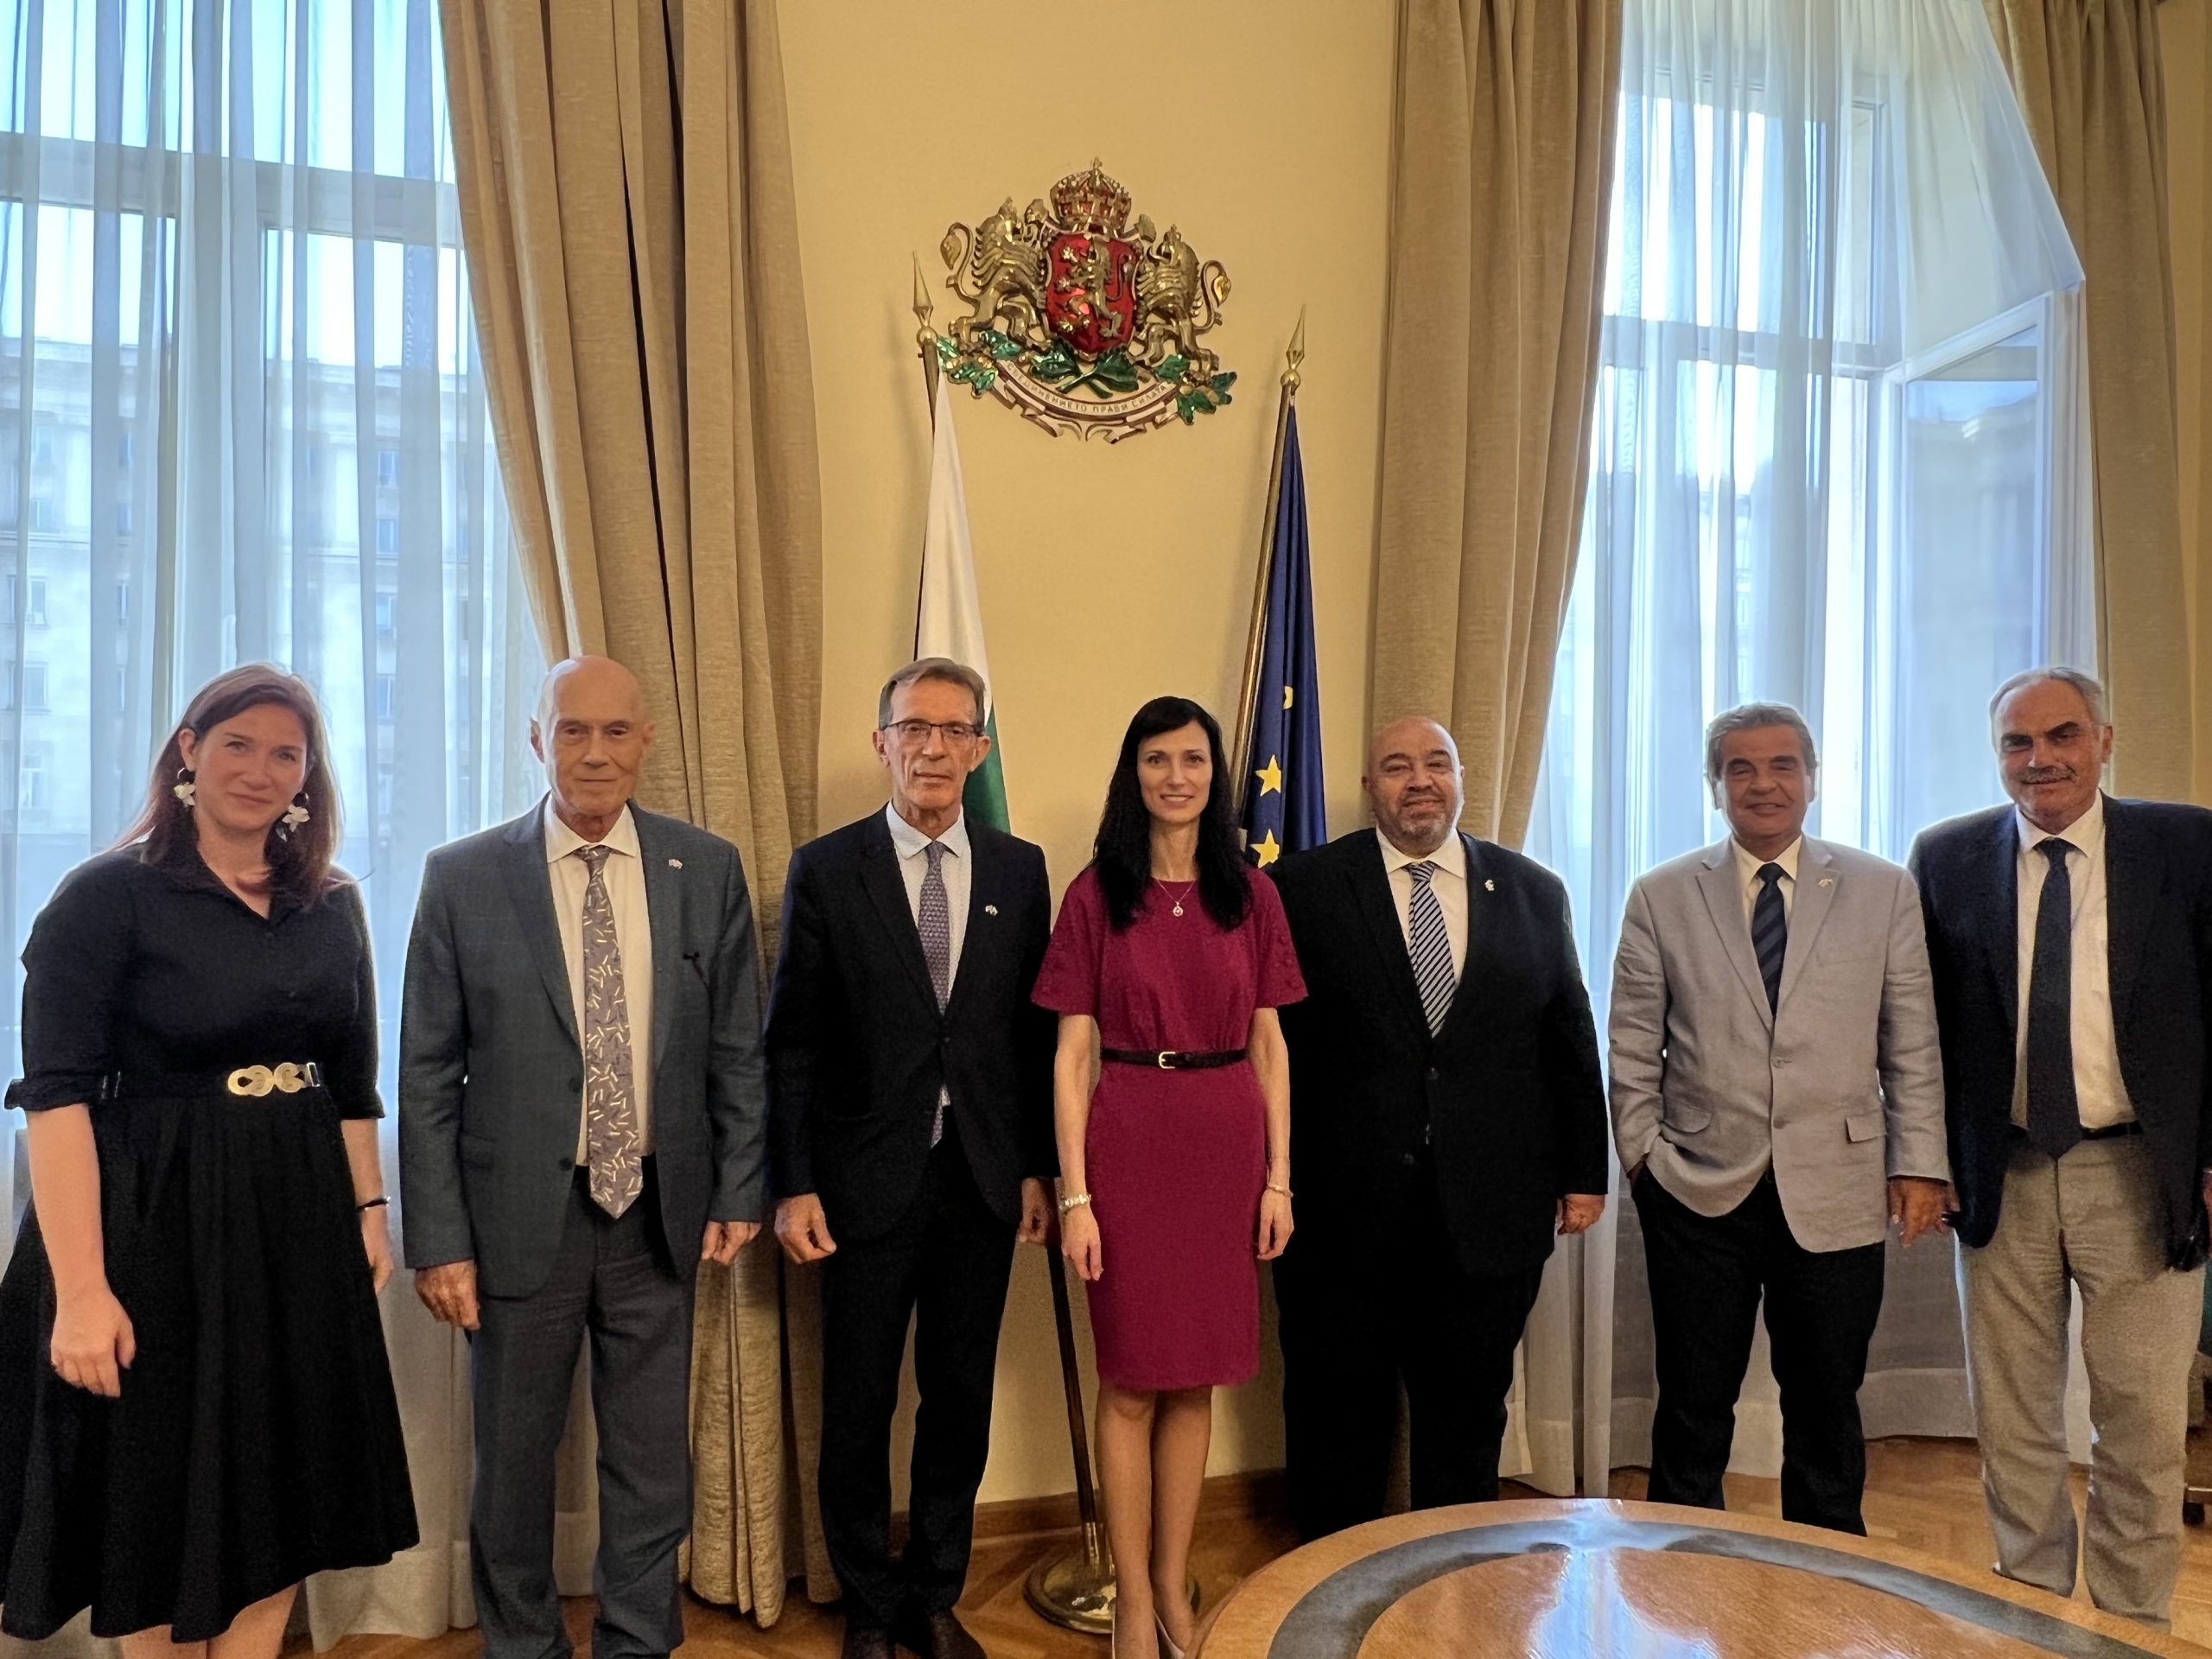 TIF: The administration of TIF-HELEXPO met with the political leadership of Bulgaria